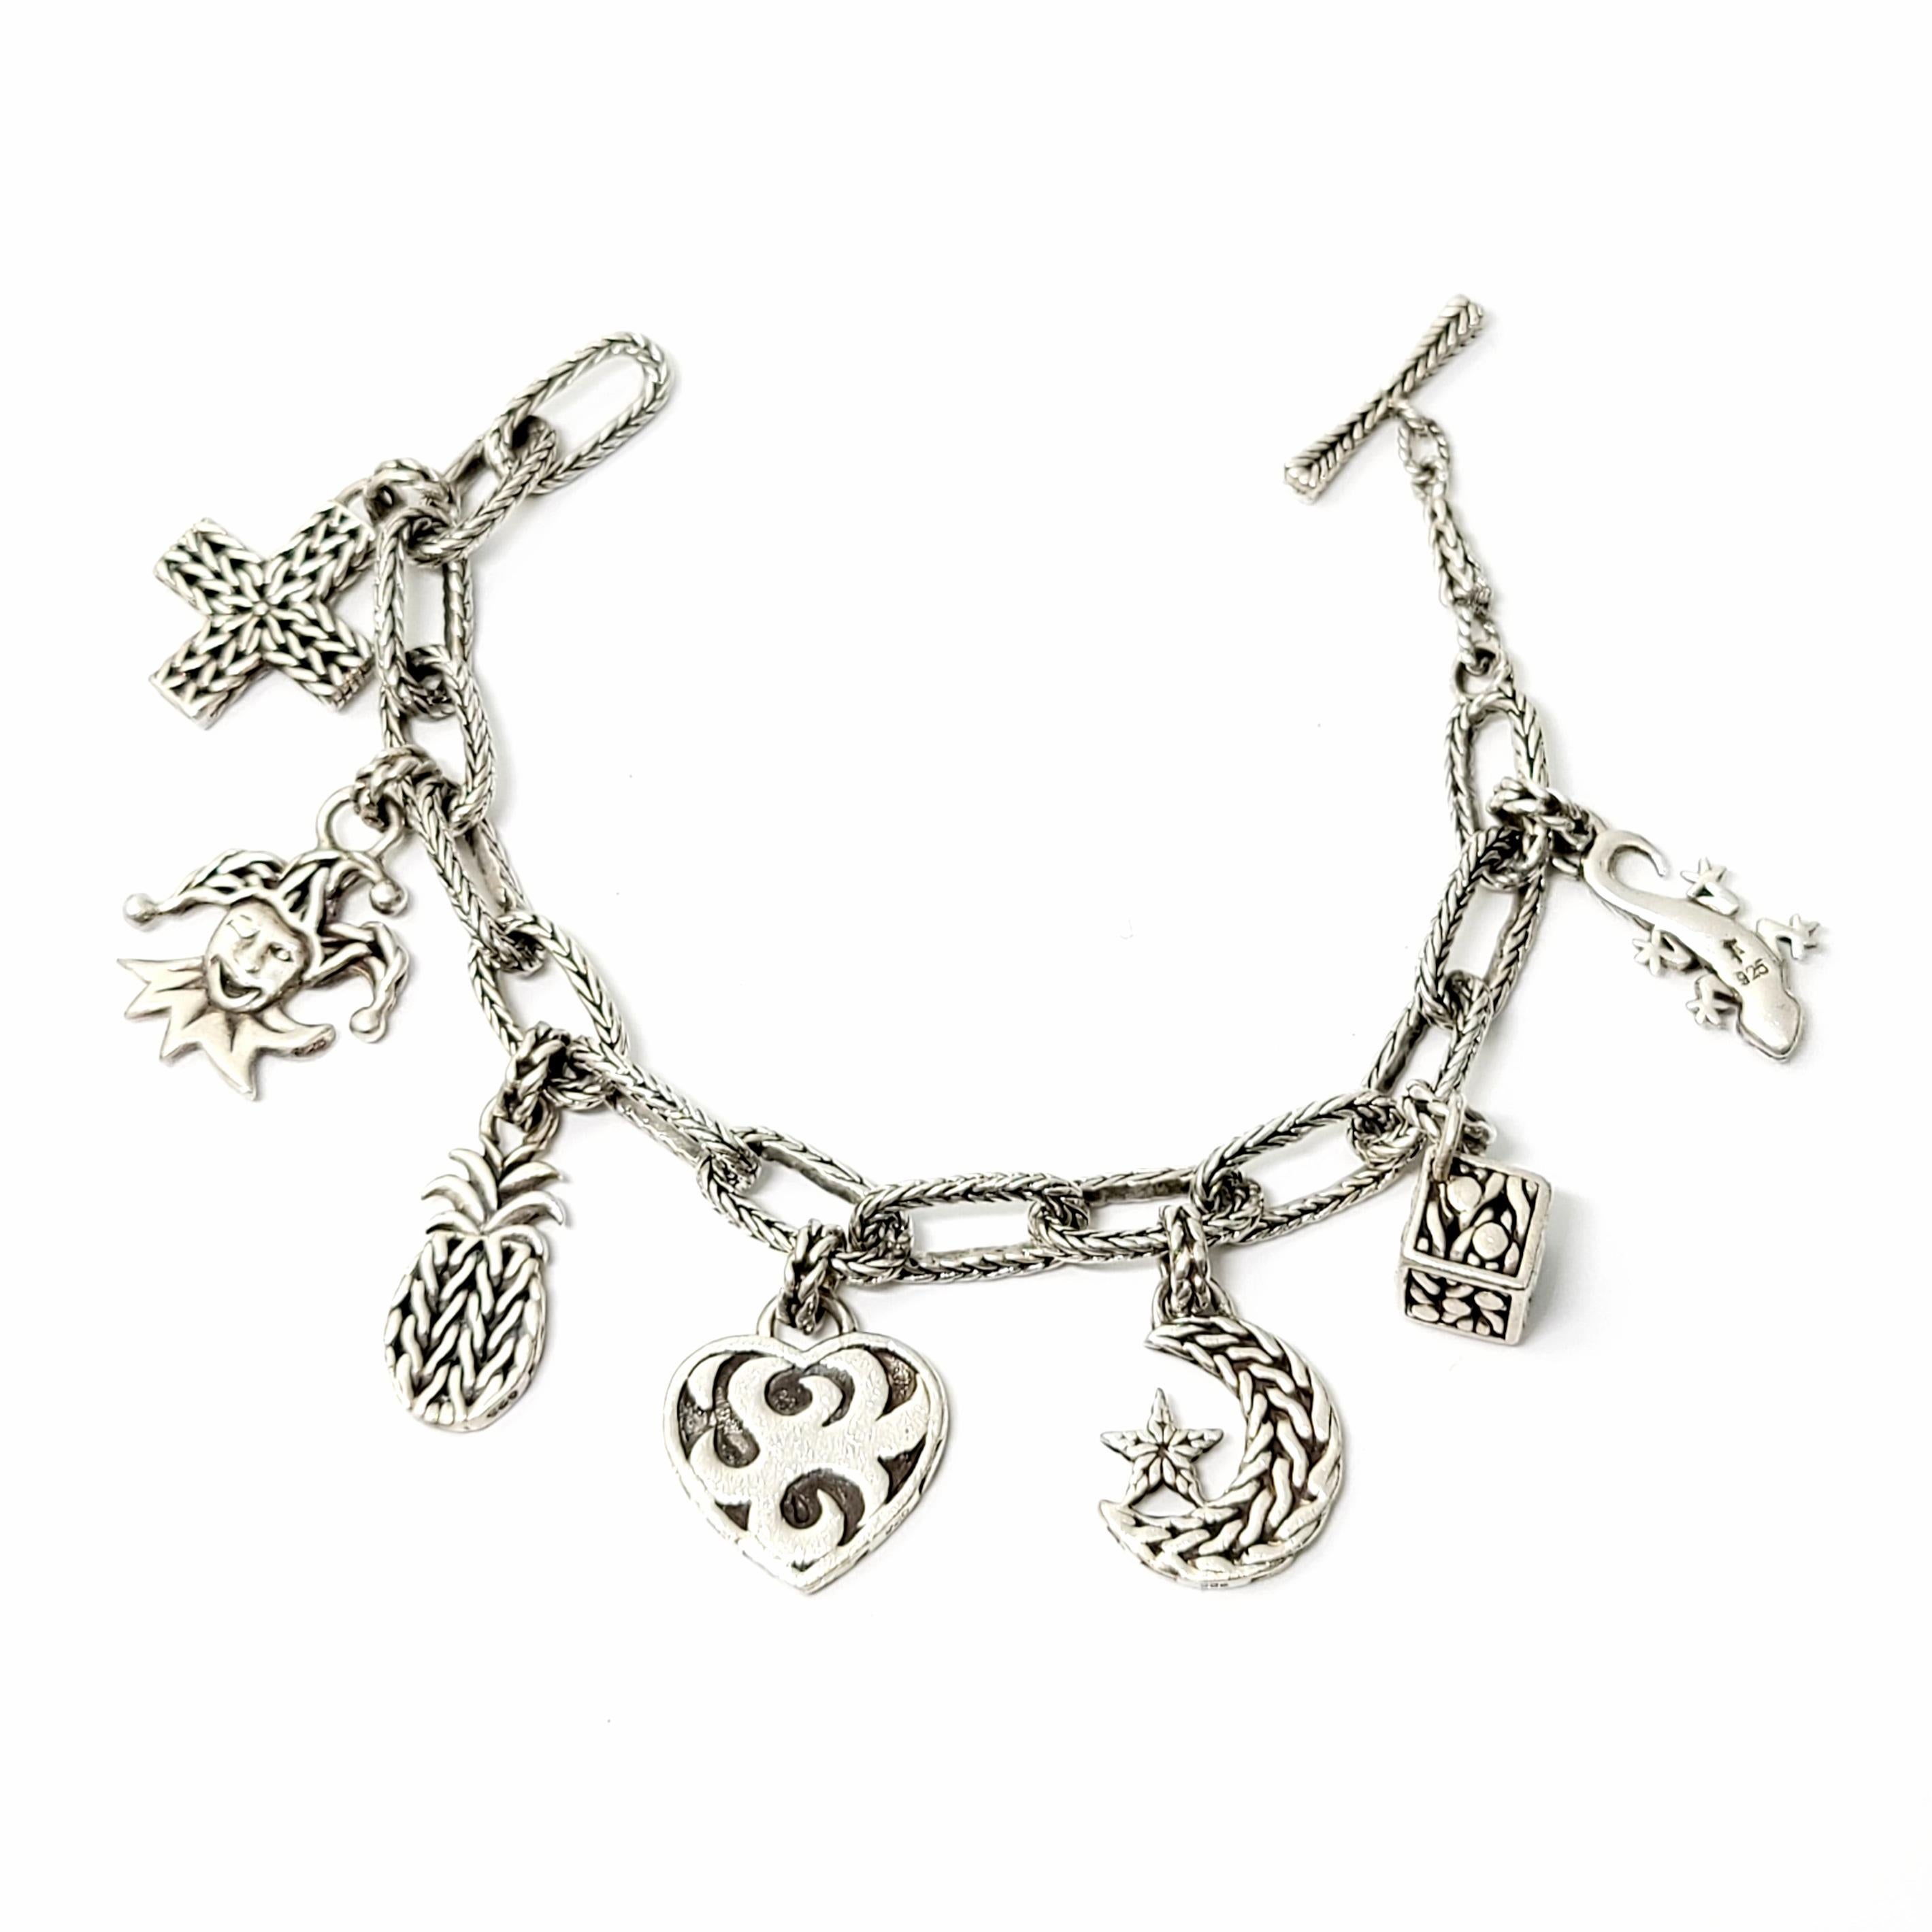 John Hardy sterling silver charm bracelet with 7 charms.

This oval link charm bracelet includes 7 charms: cross, joker, pineapple, heart, moon/star, cube and lizard. Toggle closure on bracelet. Wheat design on the links of the bracelet, as well as